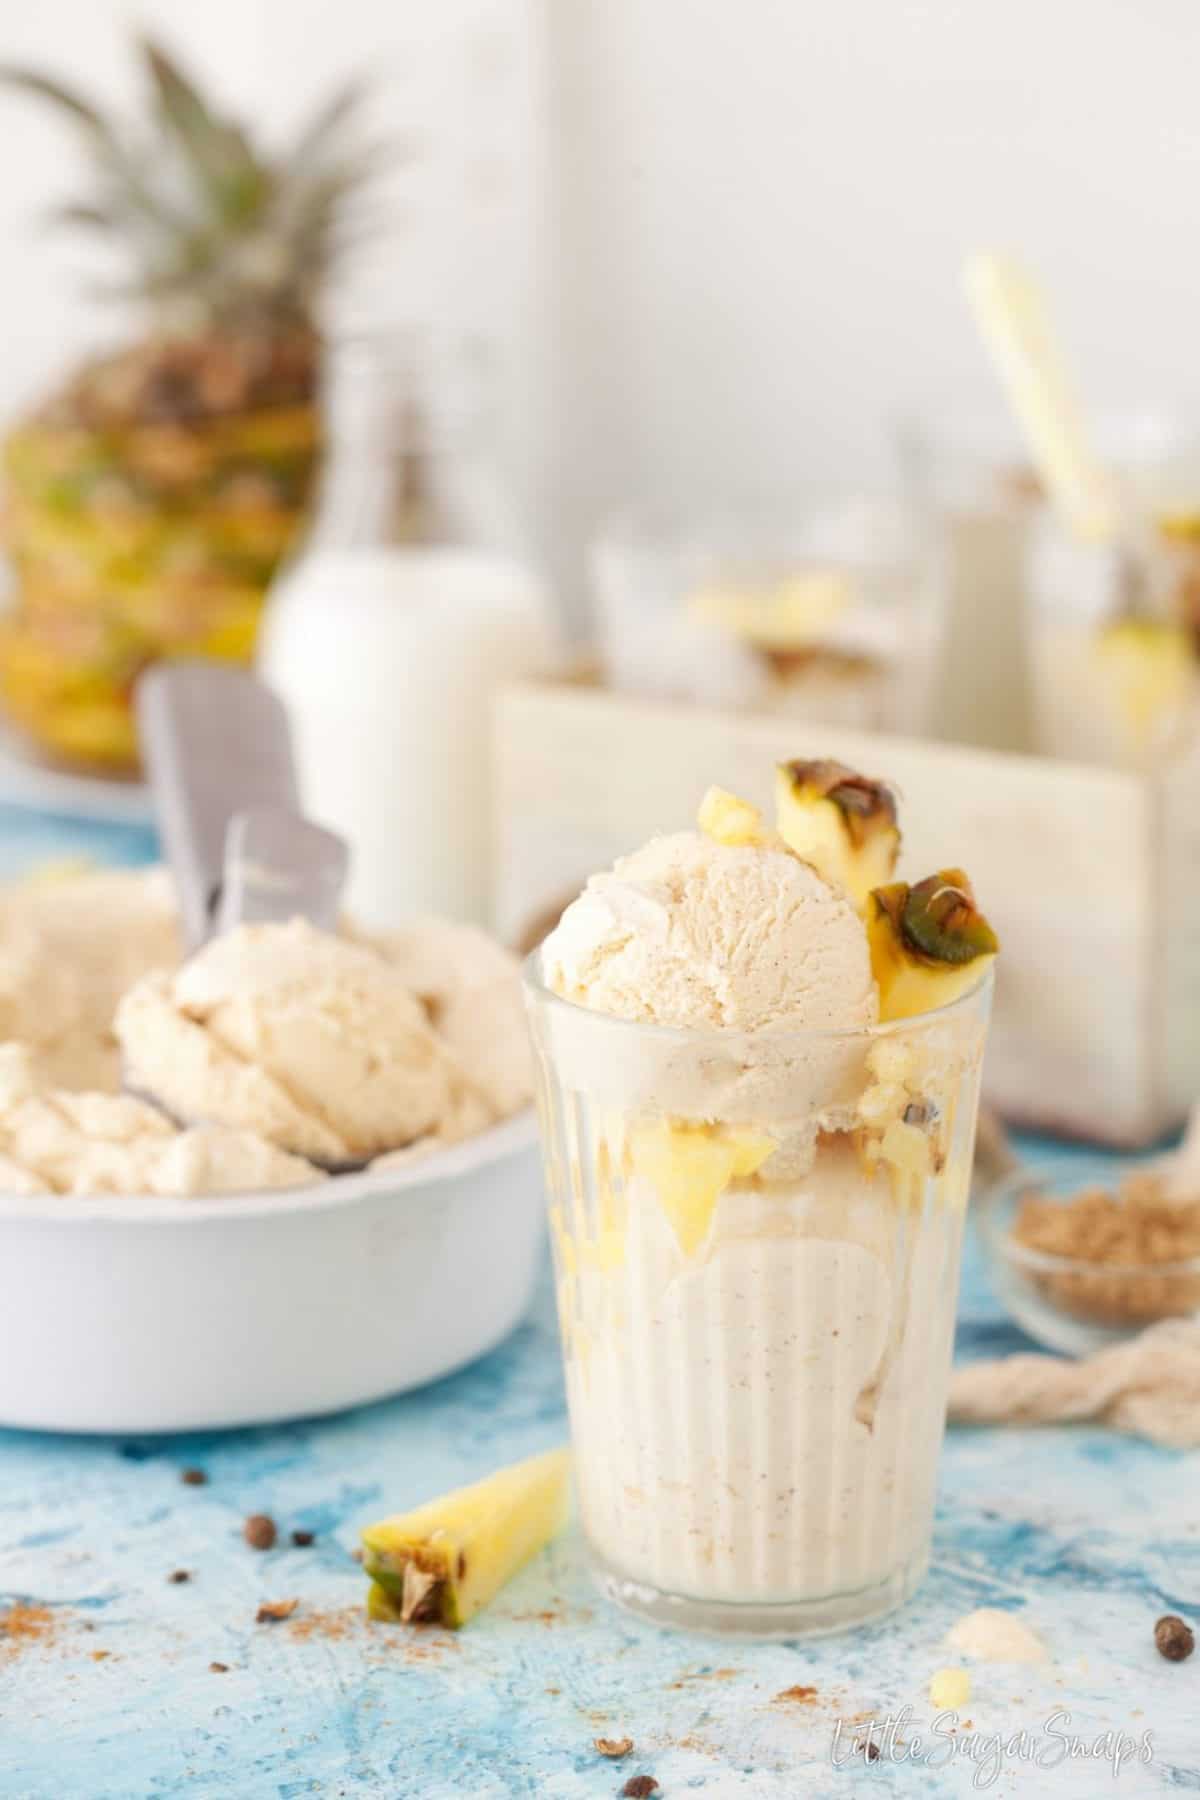 A glass with scoops of ice cream and fresh pineapple.